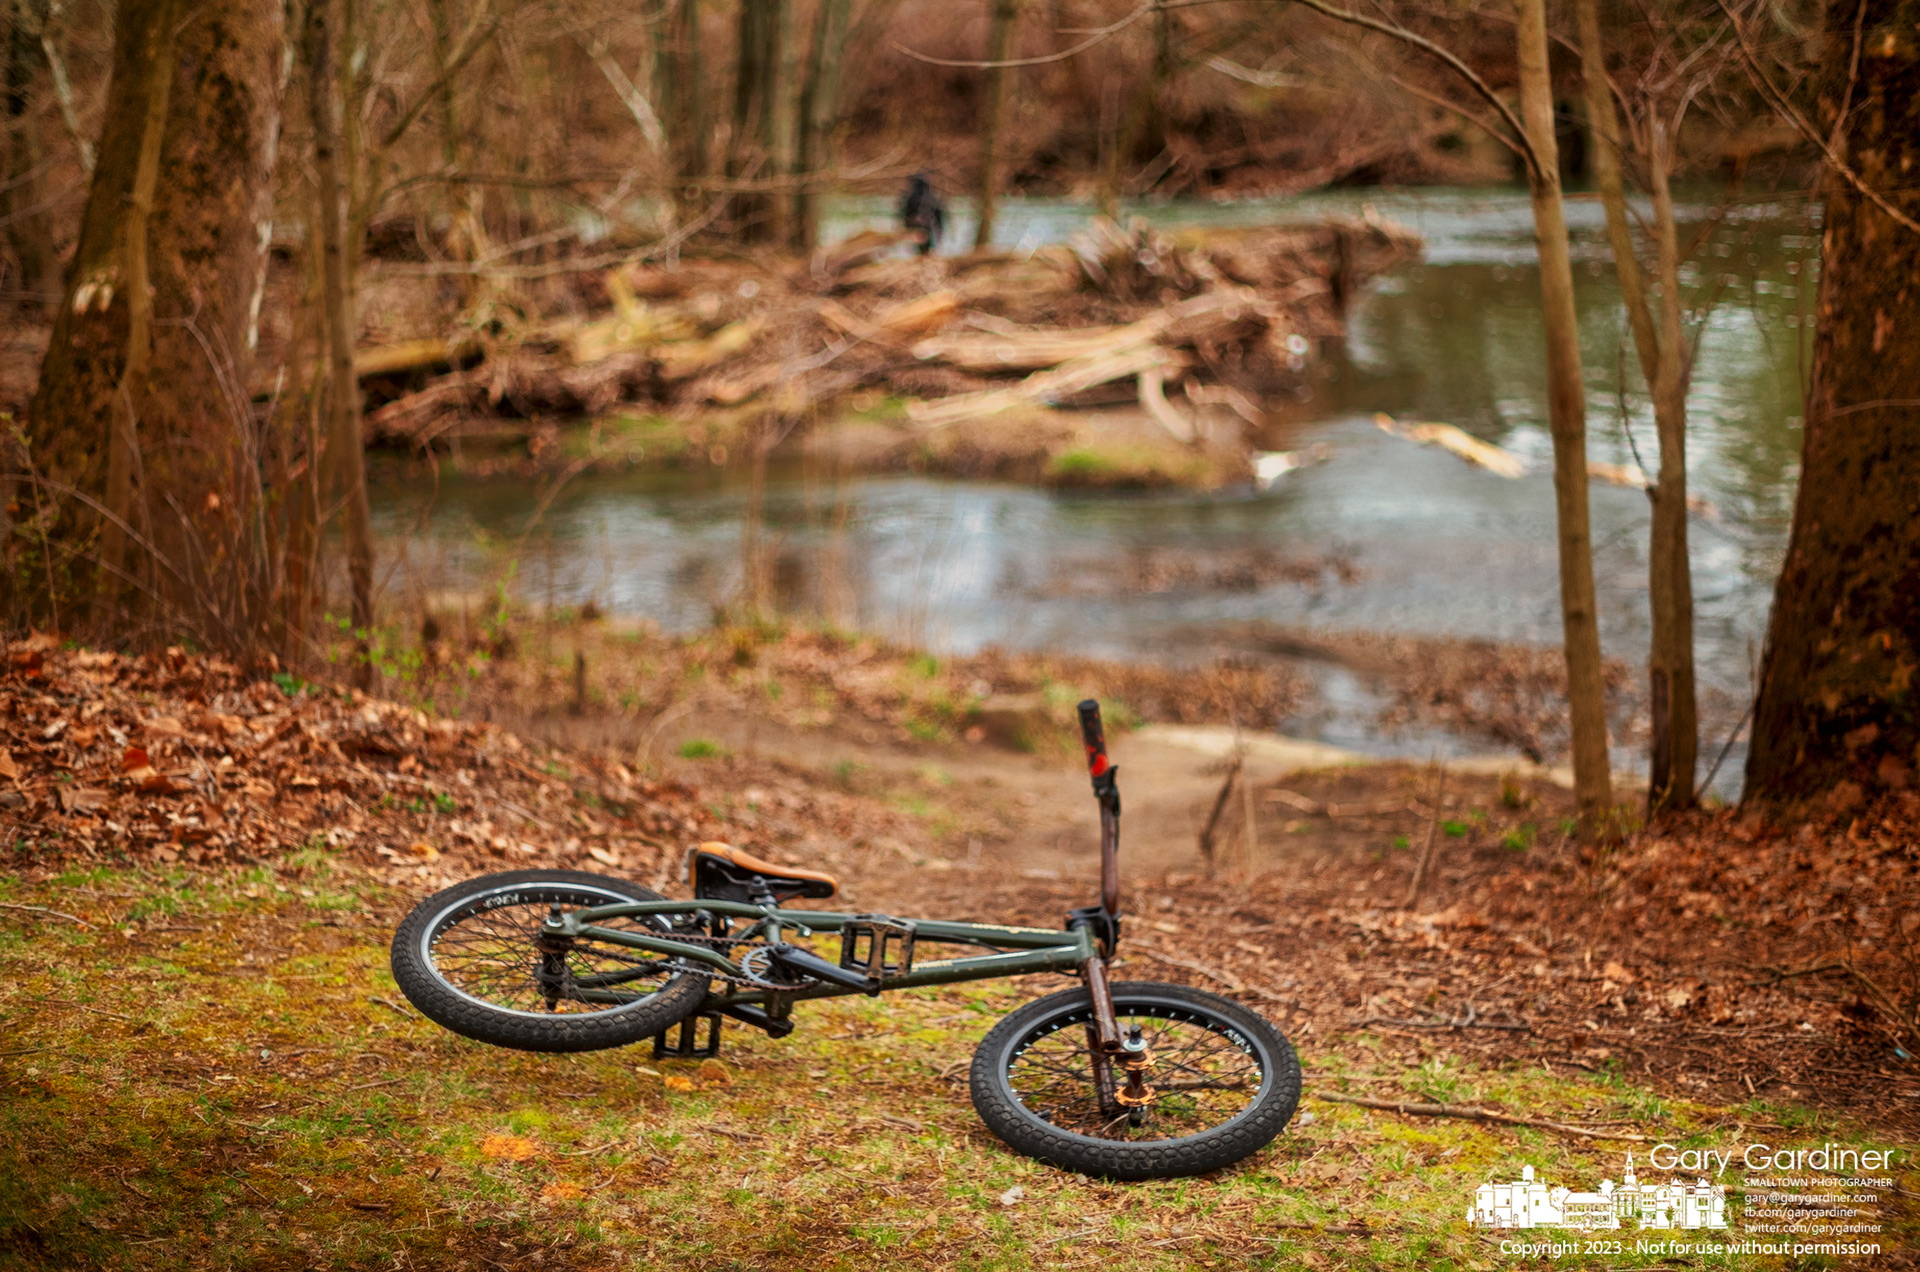 A young fisherman's bicycle lies in the grass near the Alum Creek dam where he and a friend dropped their bikes, donned wading boots, and traveled into the waters of the dam for an afternoon of testing their skill and luck in the high waters of the creek. My Final Photo for March 27, 2023.